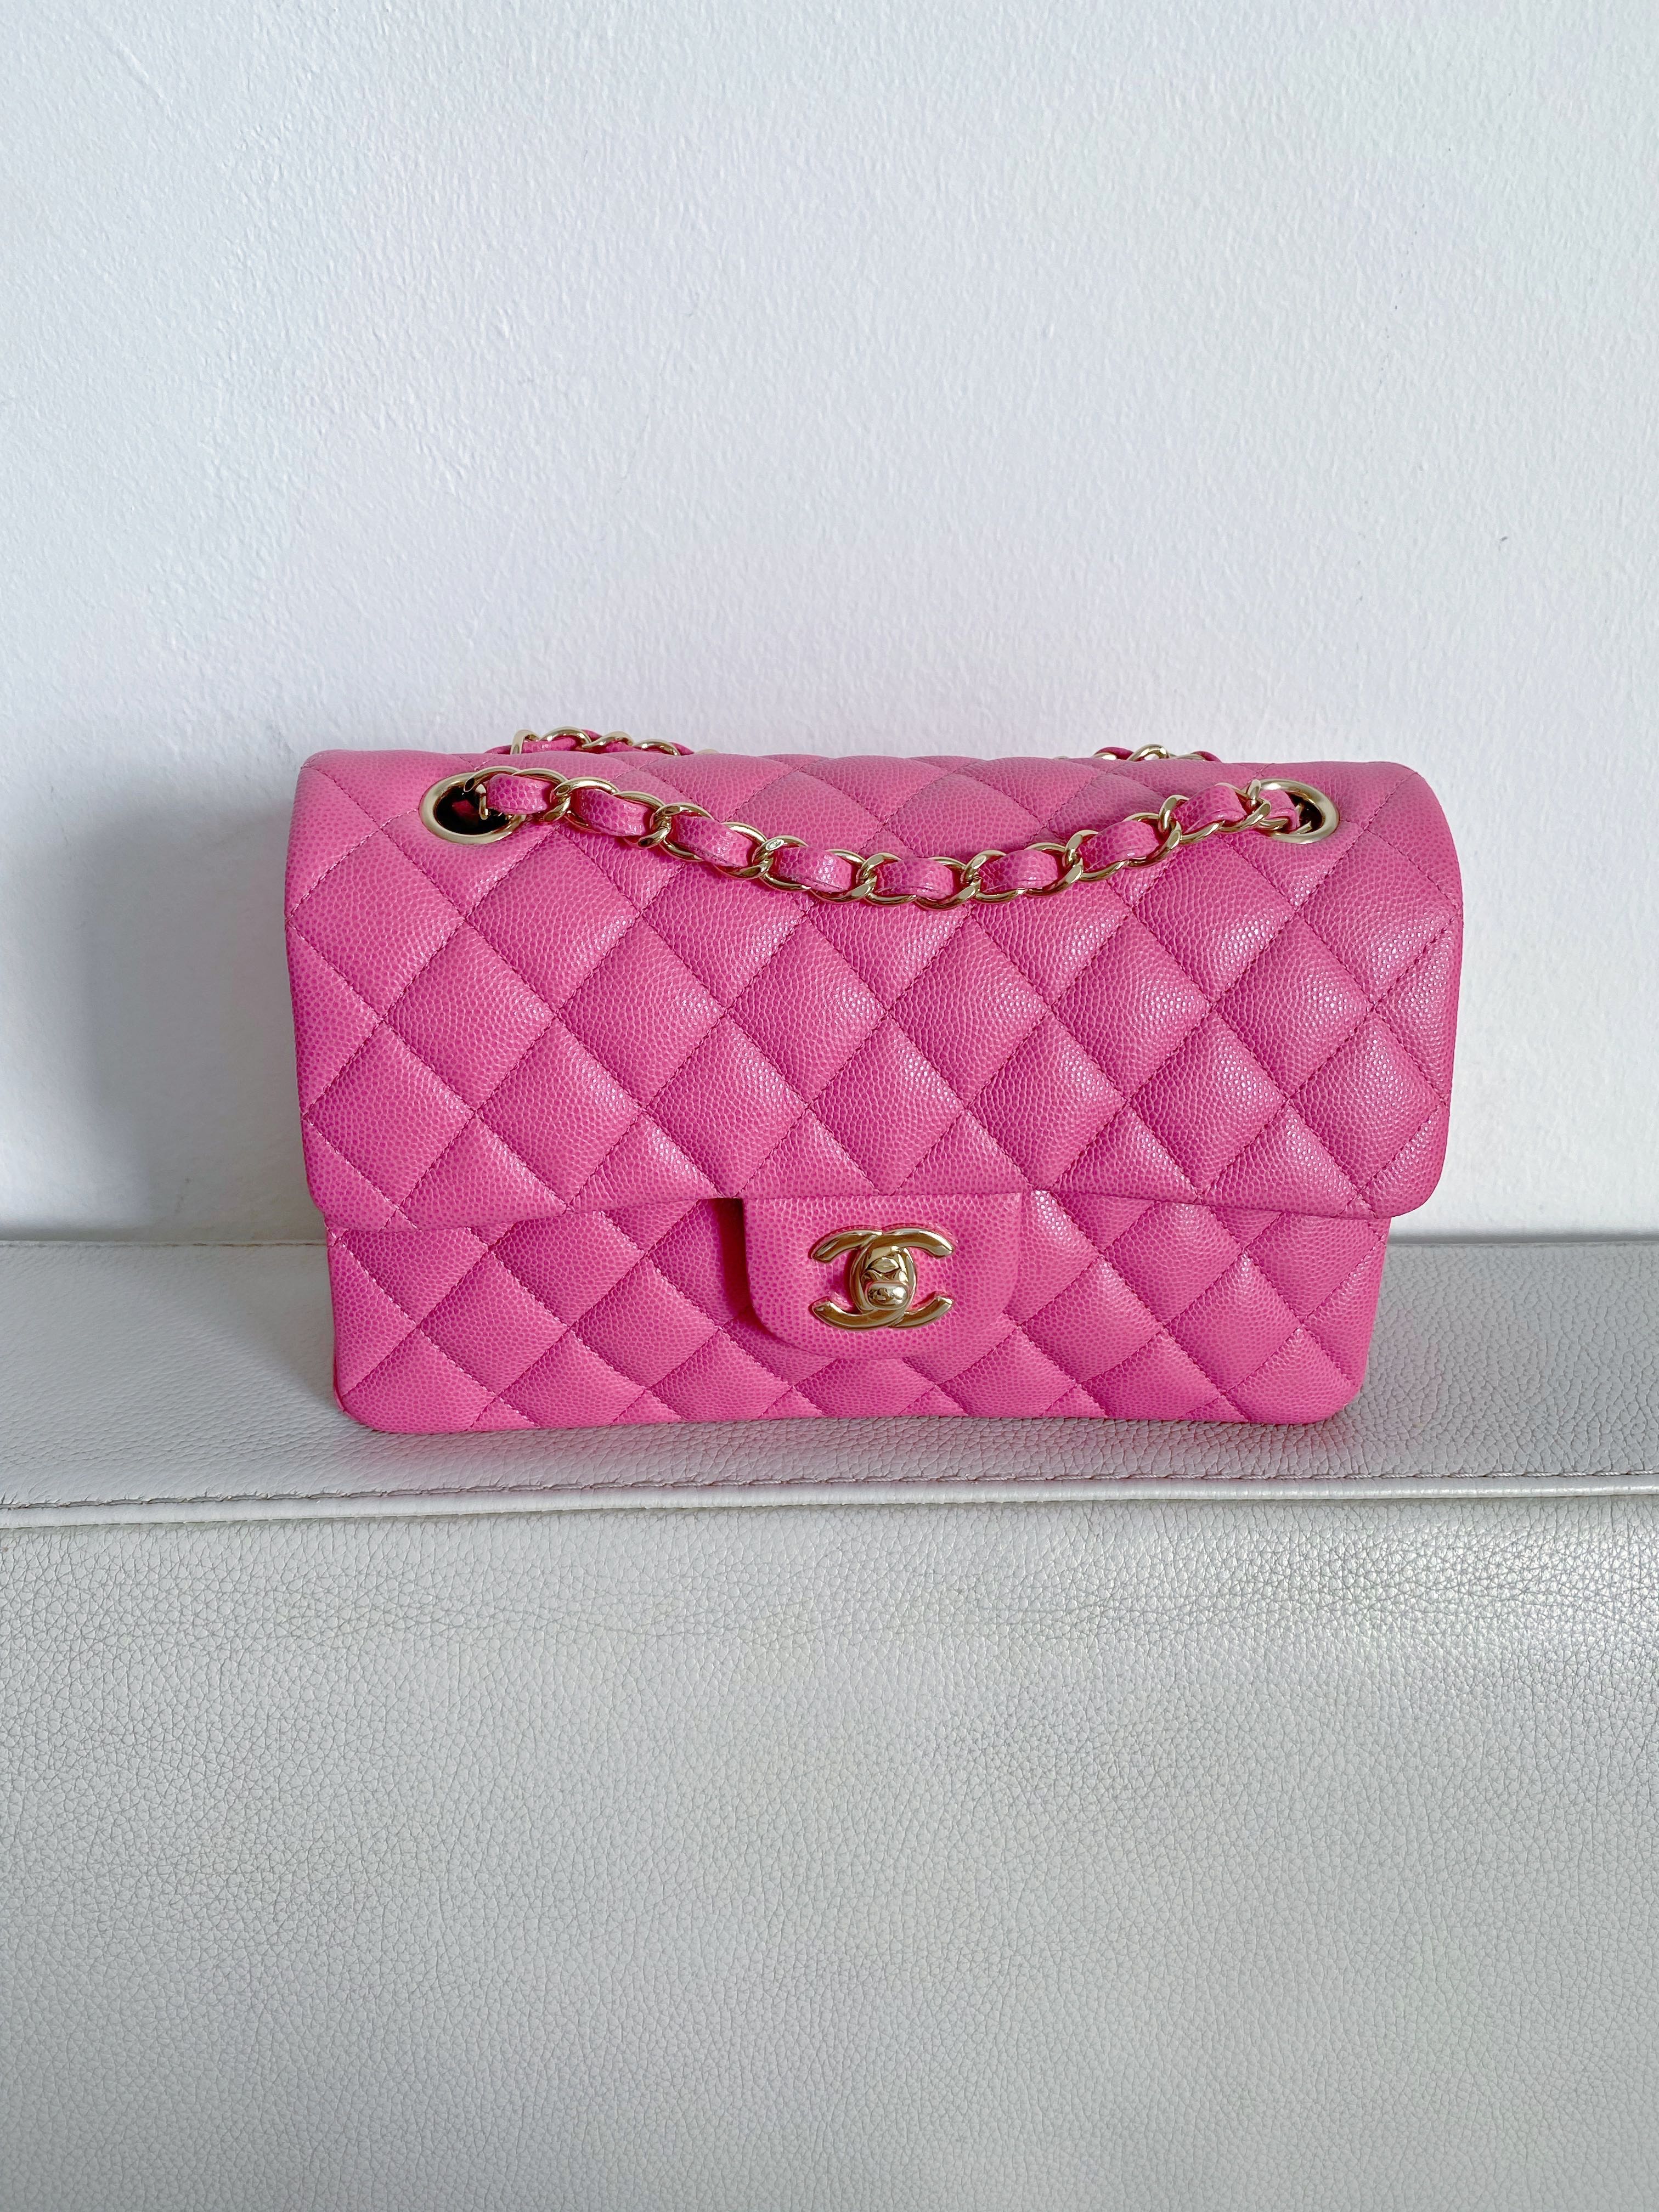 where to buy a chanel bag